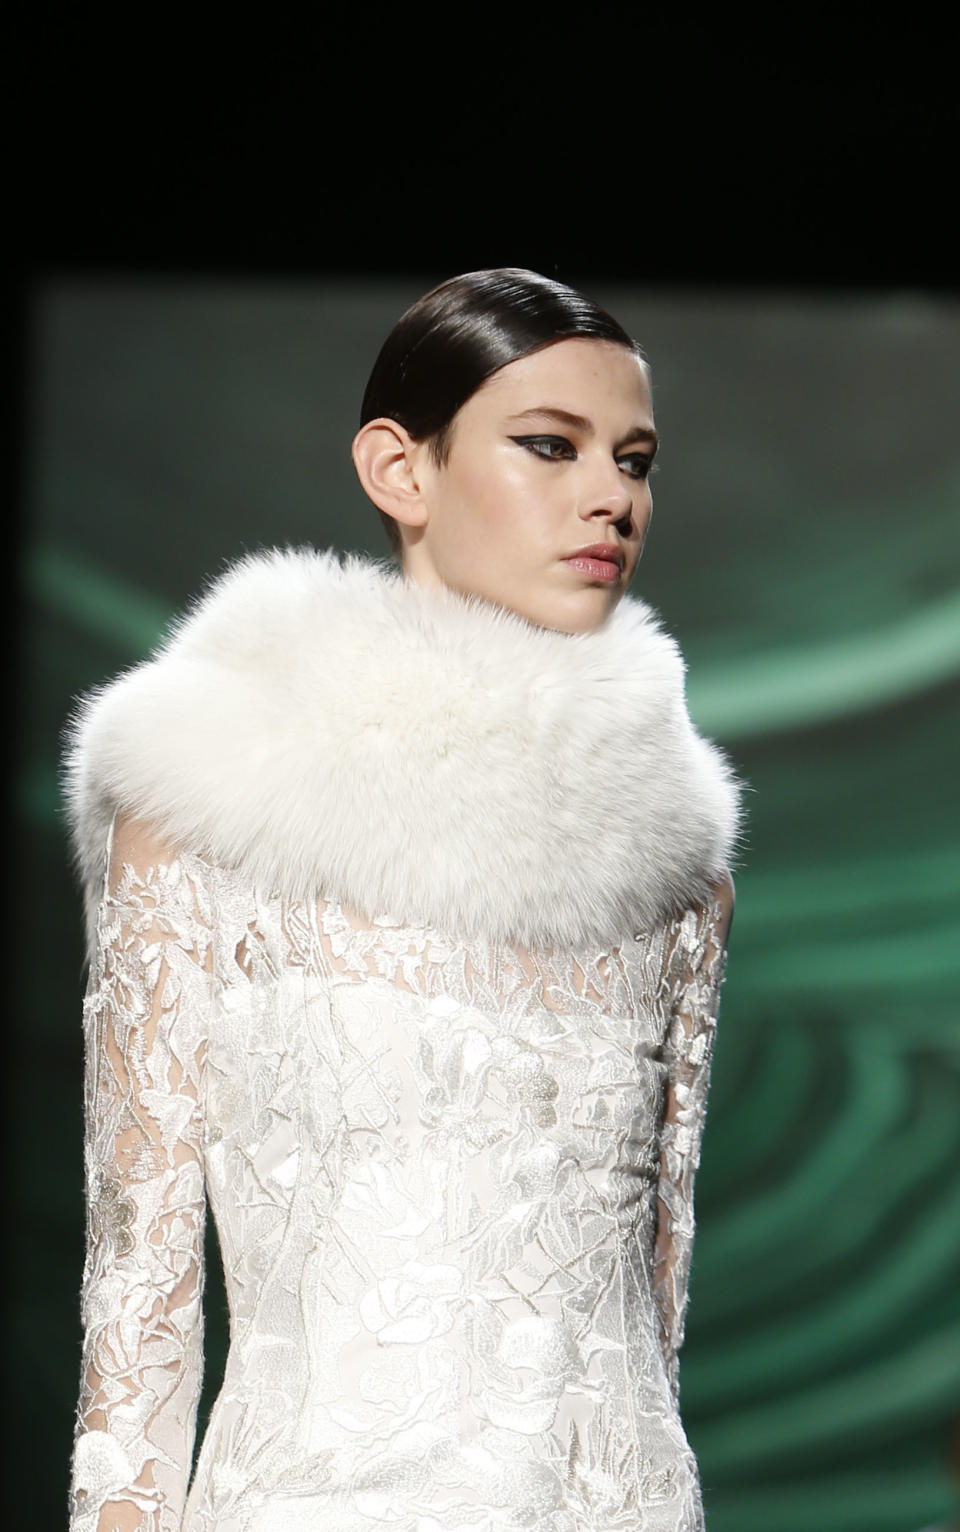 The Monique Lhuillier Fall 2013 collection is modeled during Fashion Week, Saturday, Feb. 9, 2013 in New York. (AP Photo/Jason DeCrow)